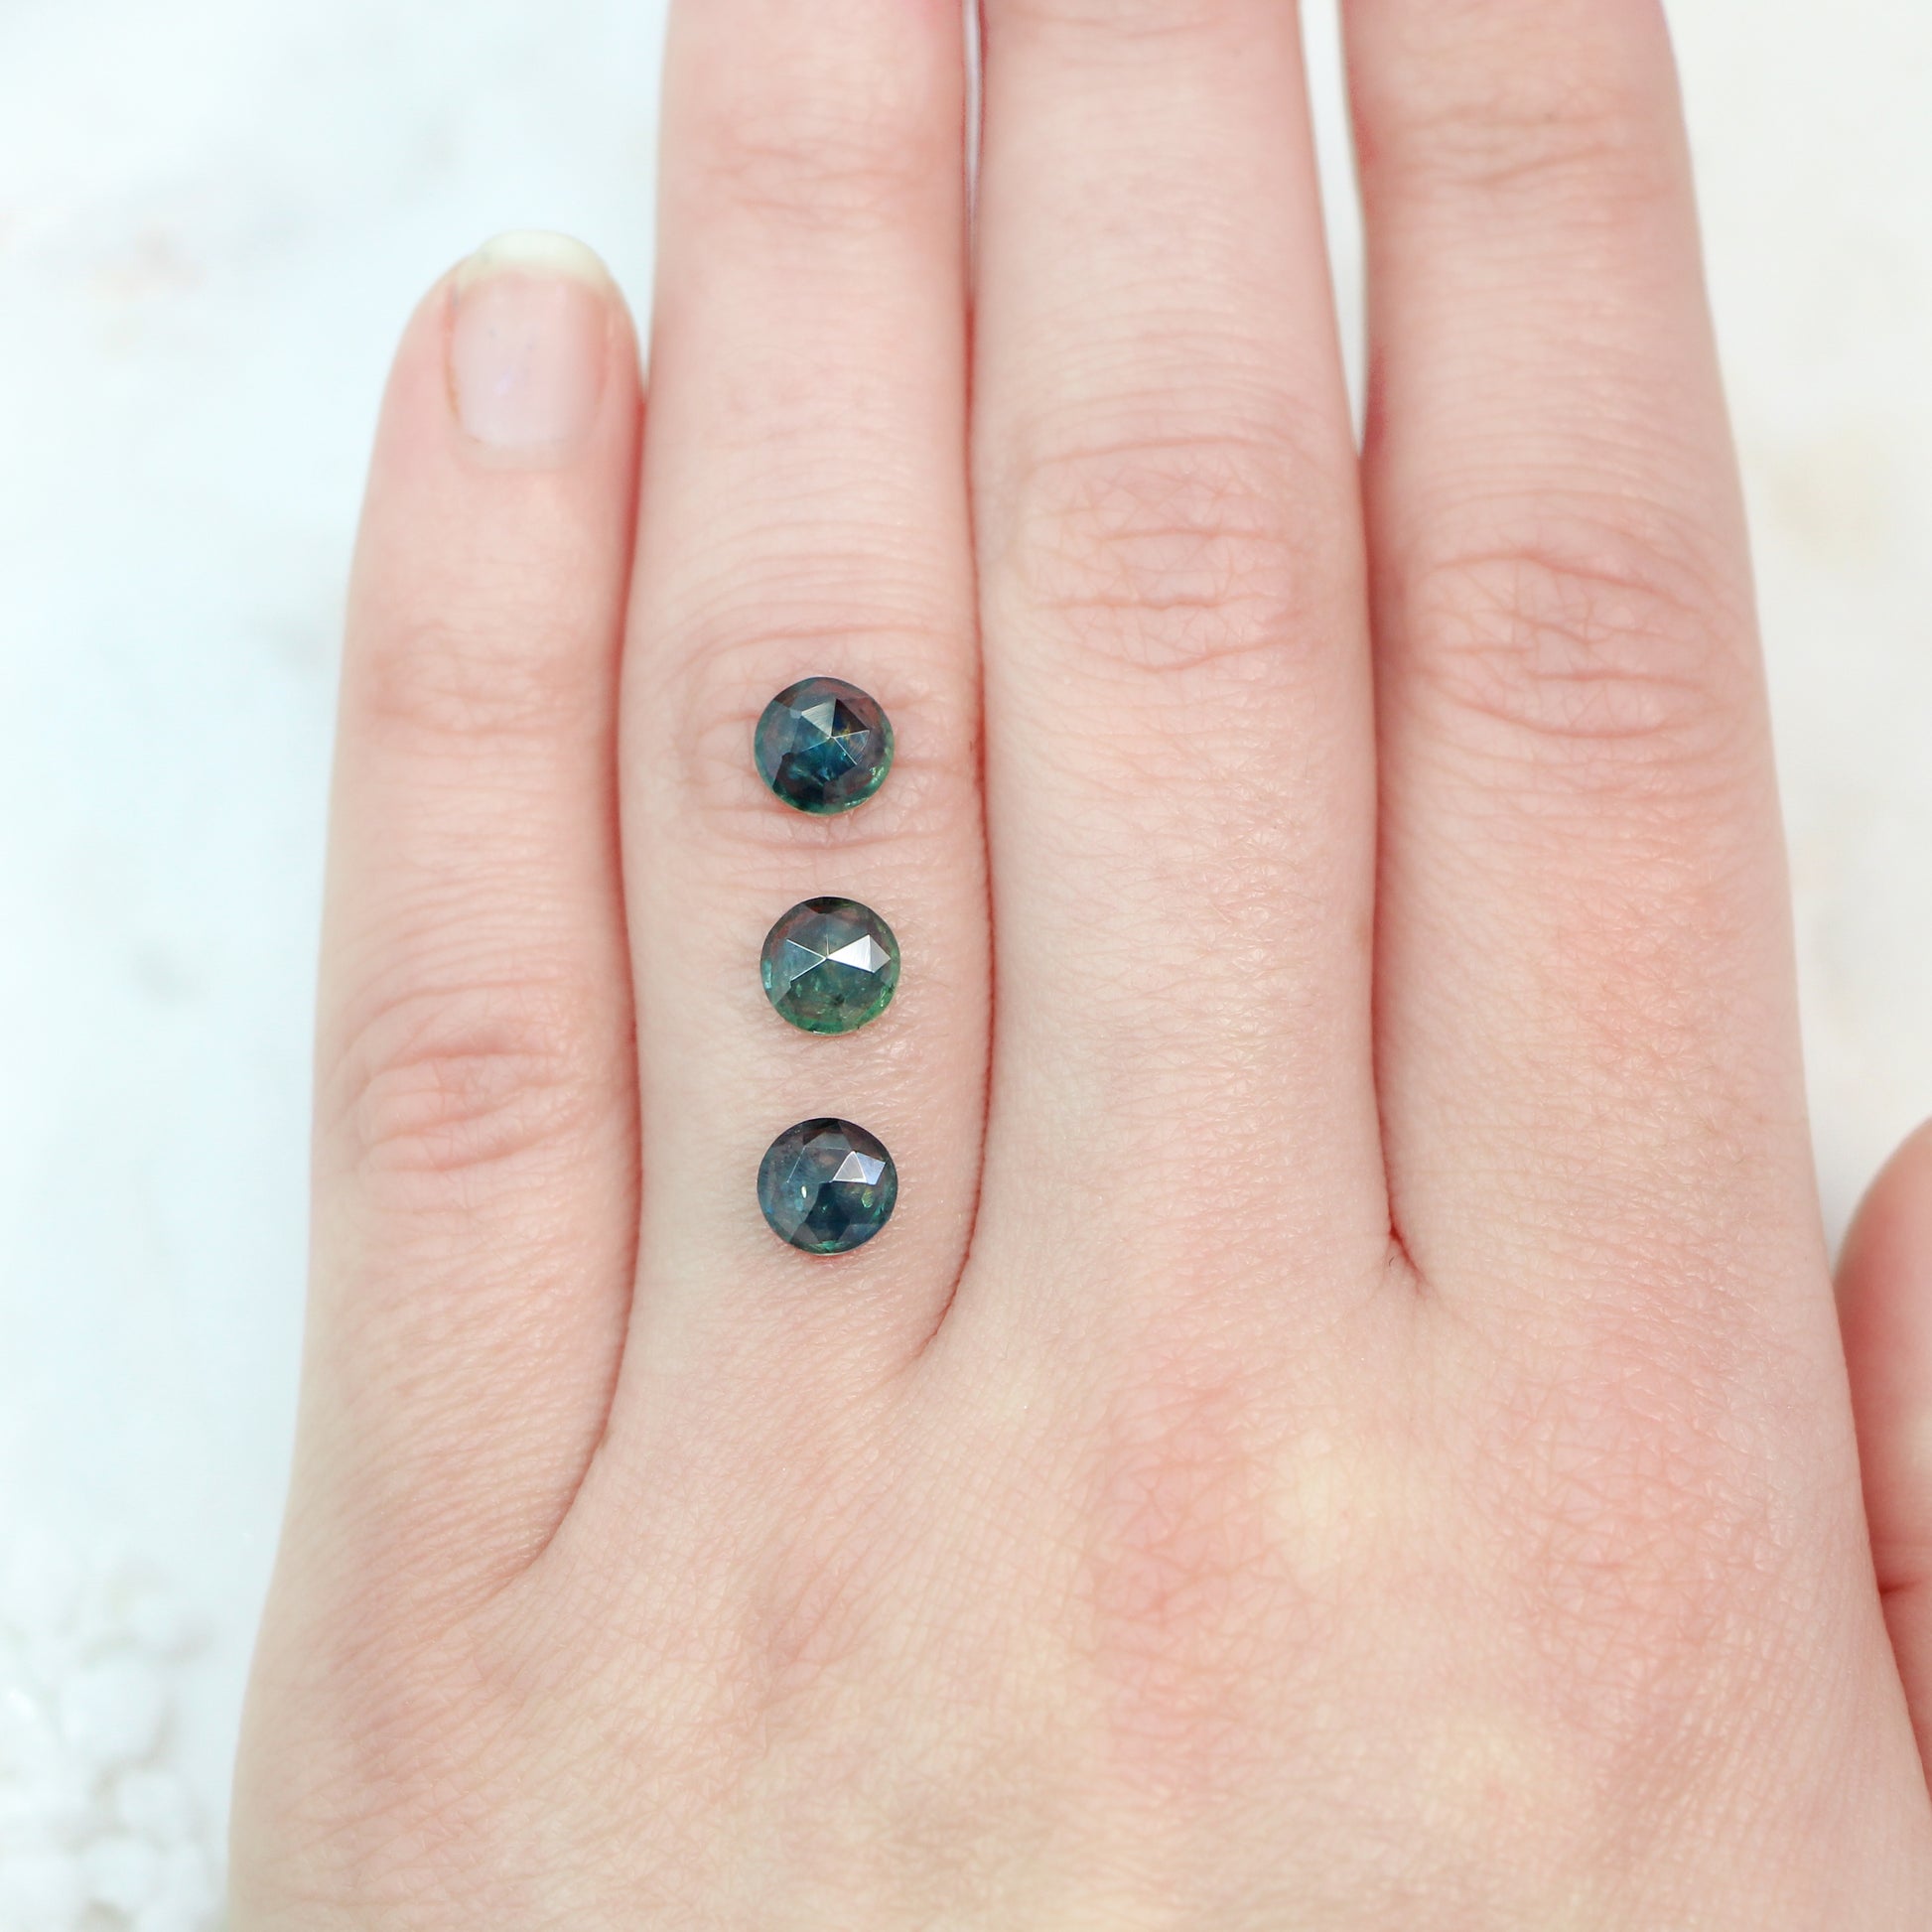 6mm Round Blue-Green Montana Sapphire for Custom Work - Inventory Code BRMS106 - Midwinter Co. Alternative Bridal Rings and Modern Fine Jewelry